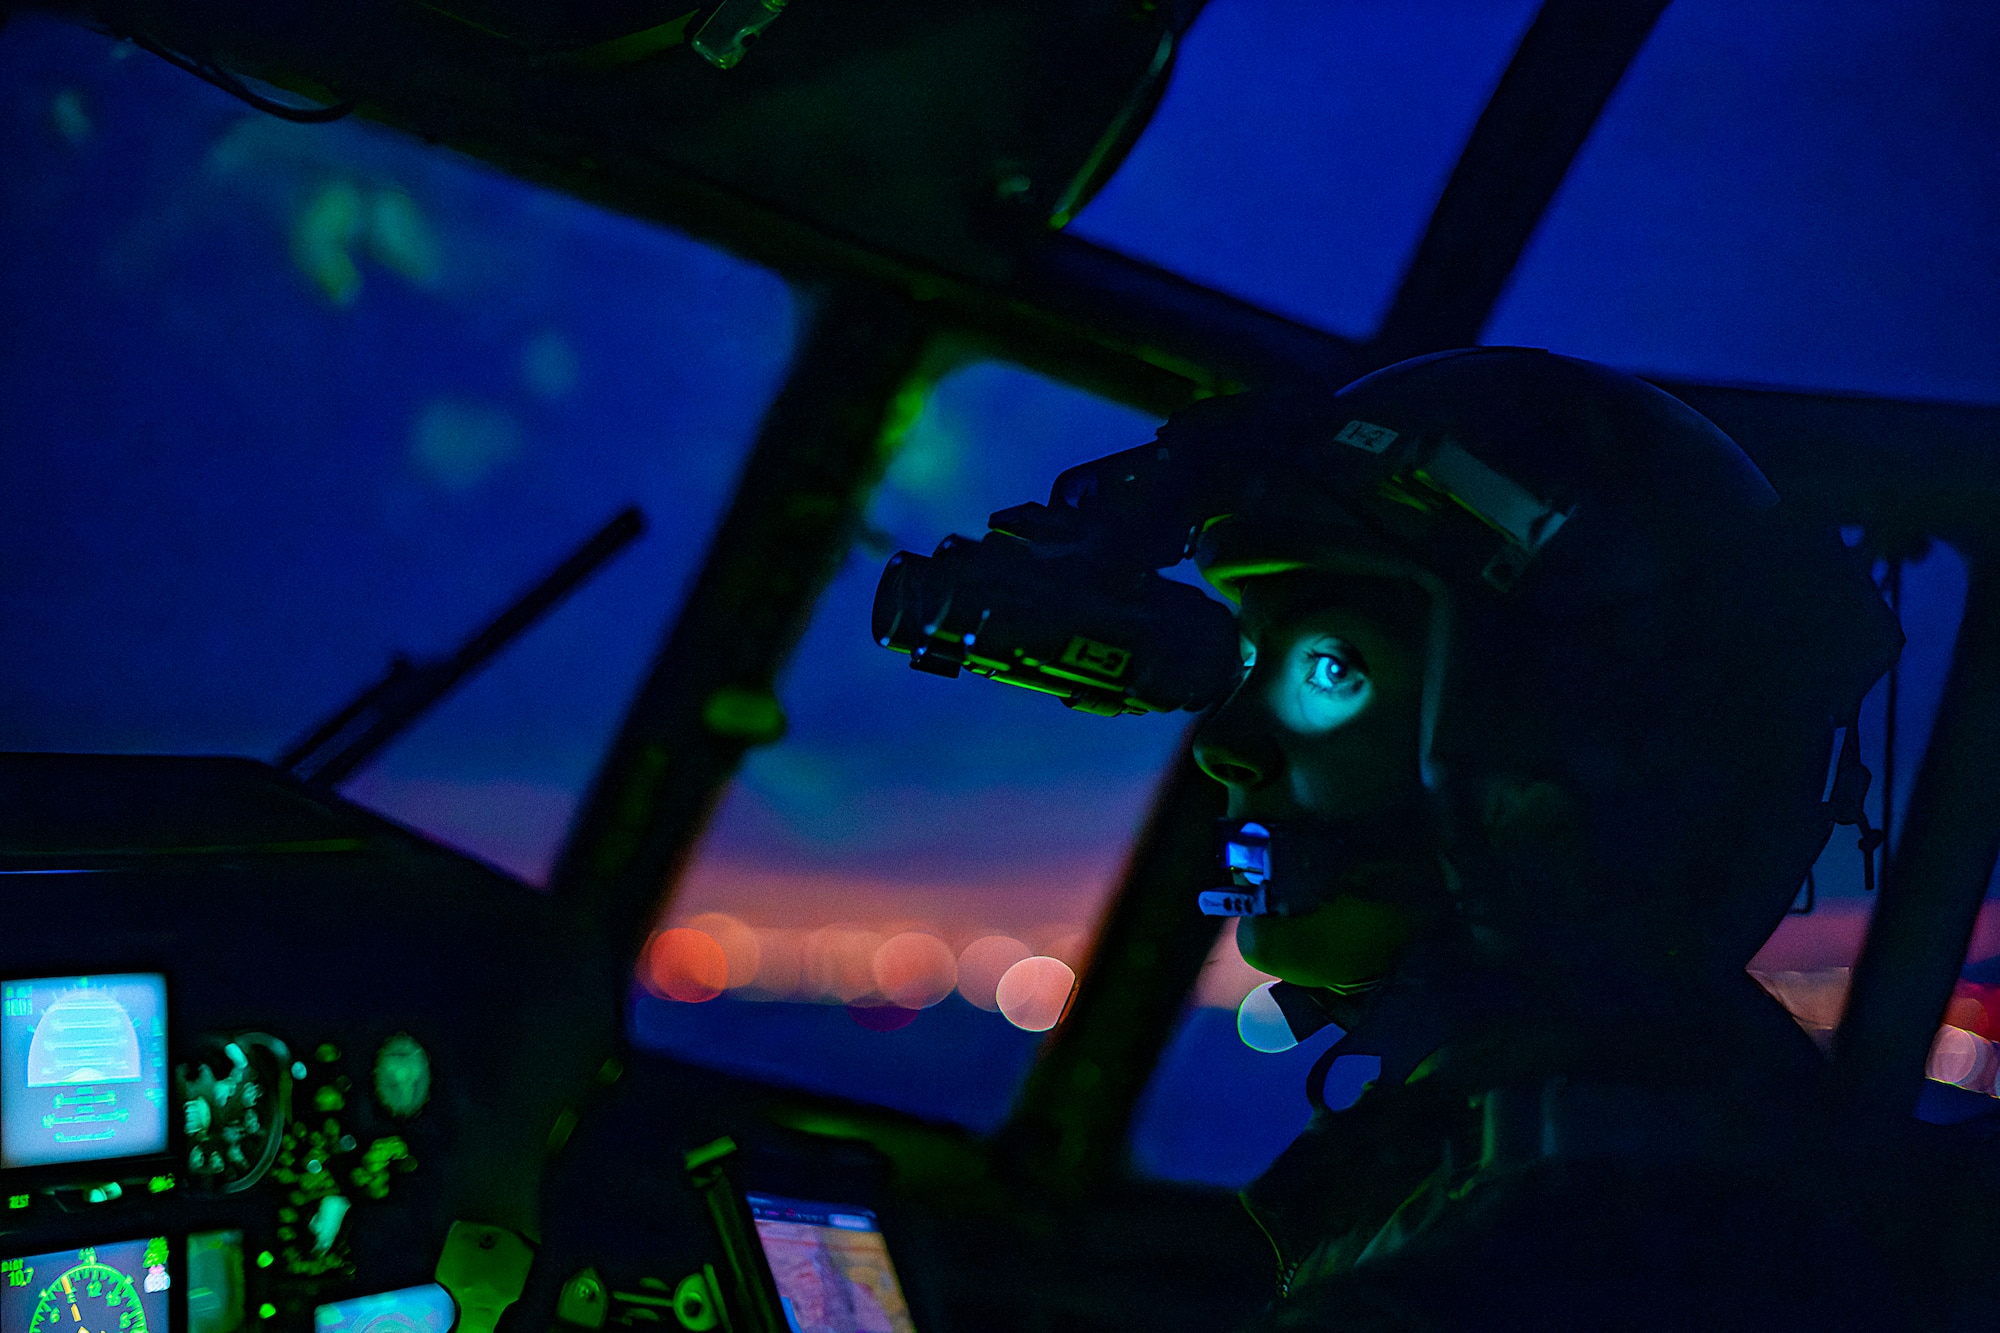 Pilot operating aircraft during dusk while wearing a helmet with Night Vision Goggles attached.